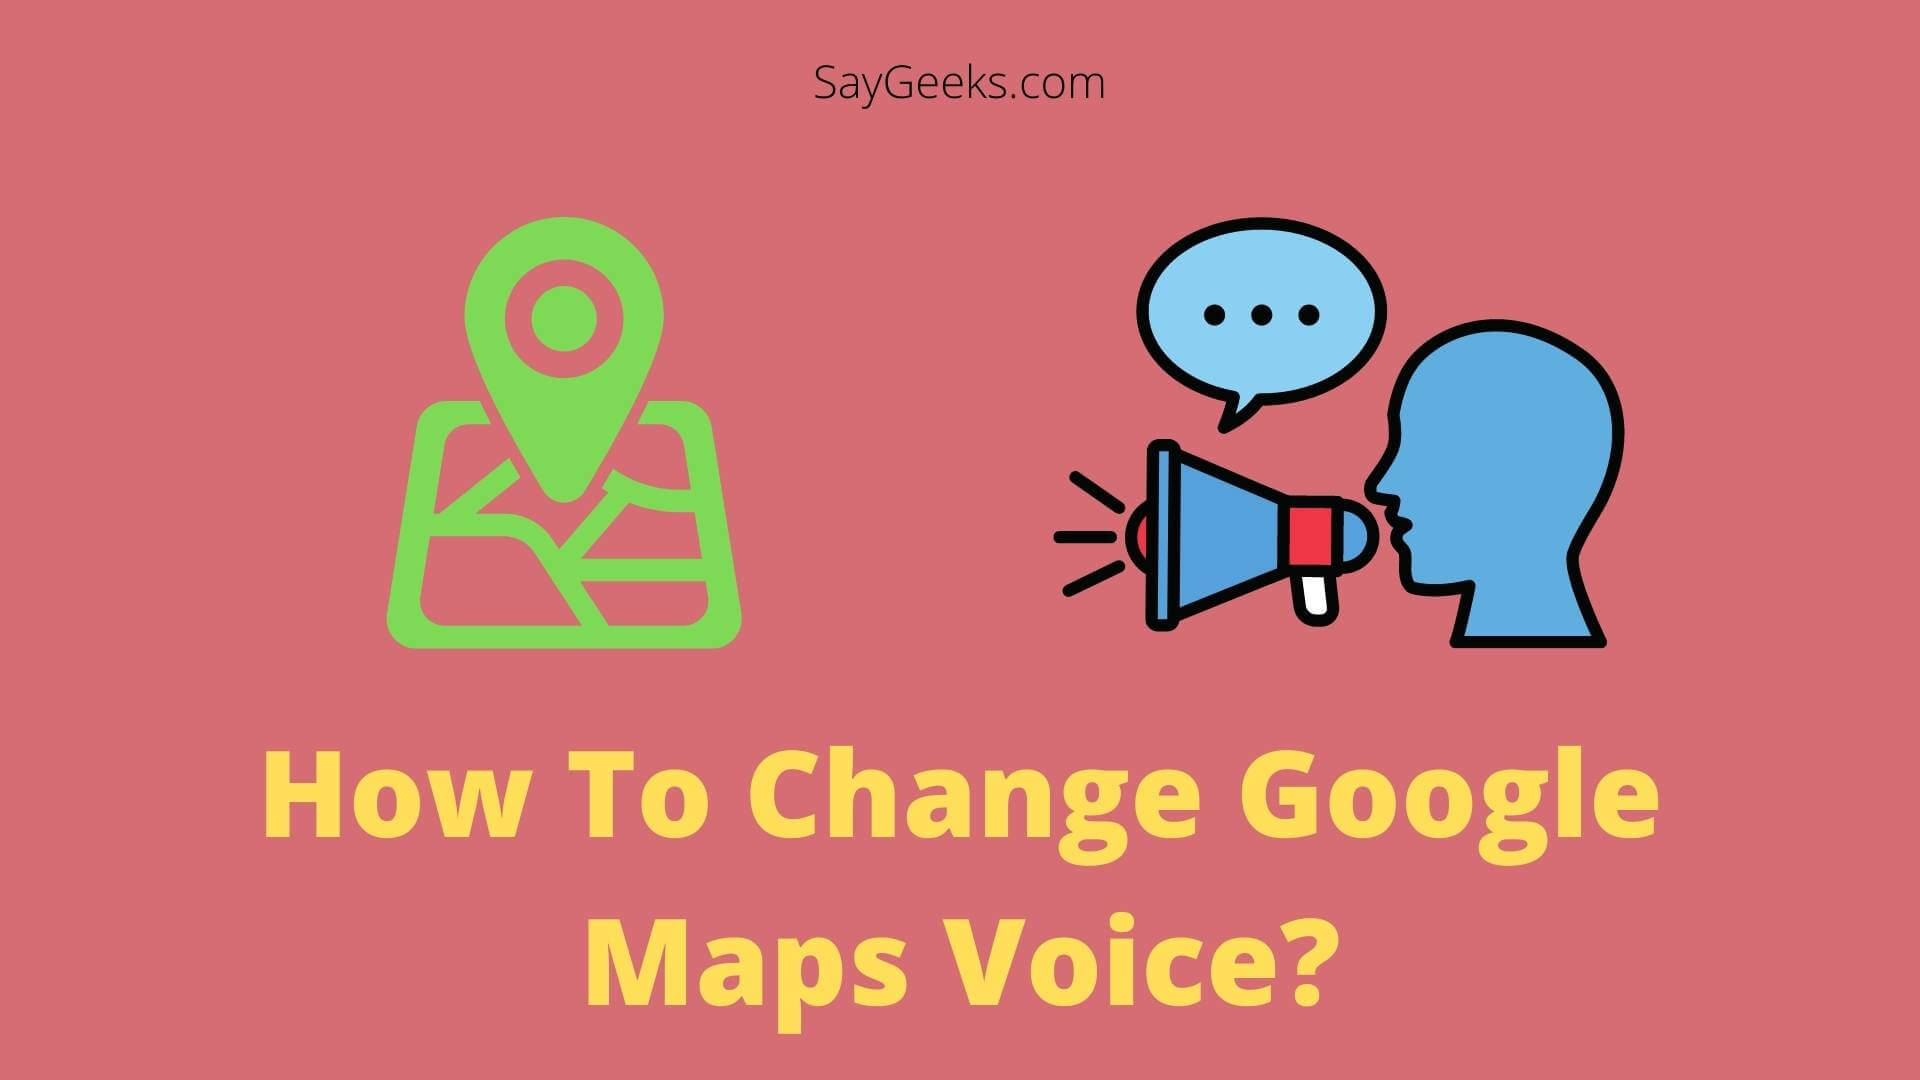 How To Change Google Maps Voice? Here's how. 1